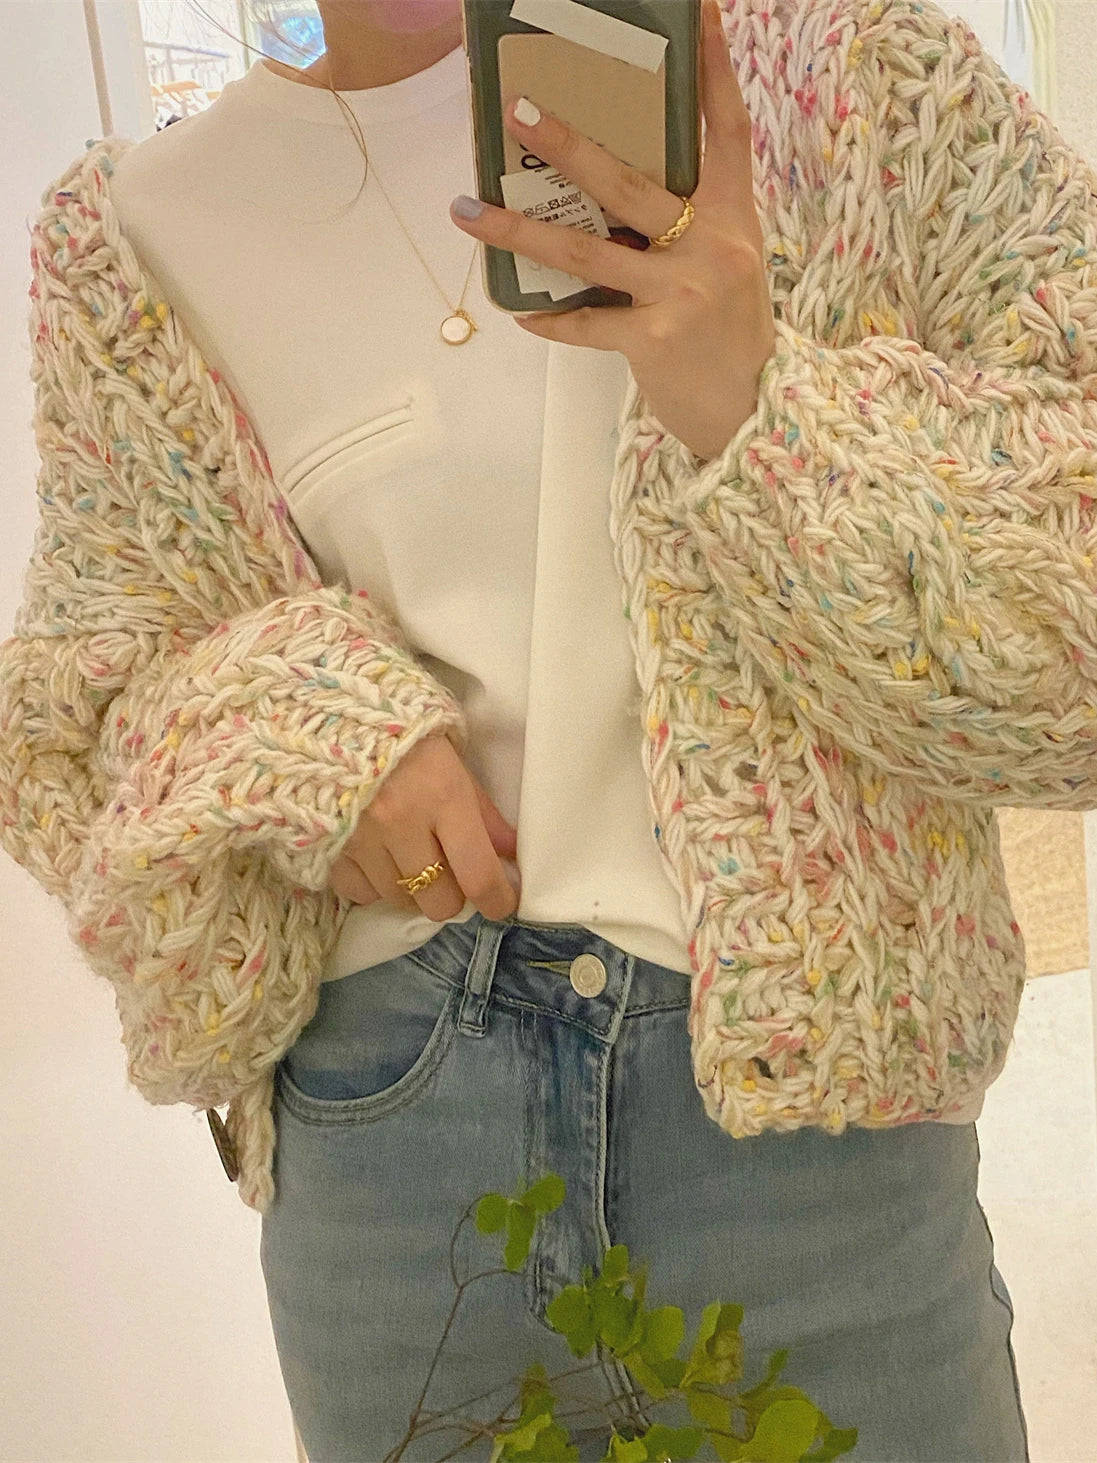 Handmade Chunky Knit Tops Women Fashion Cropped Knitted Cardigan Sweater Colourful Streetwear C-170